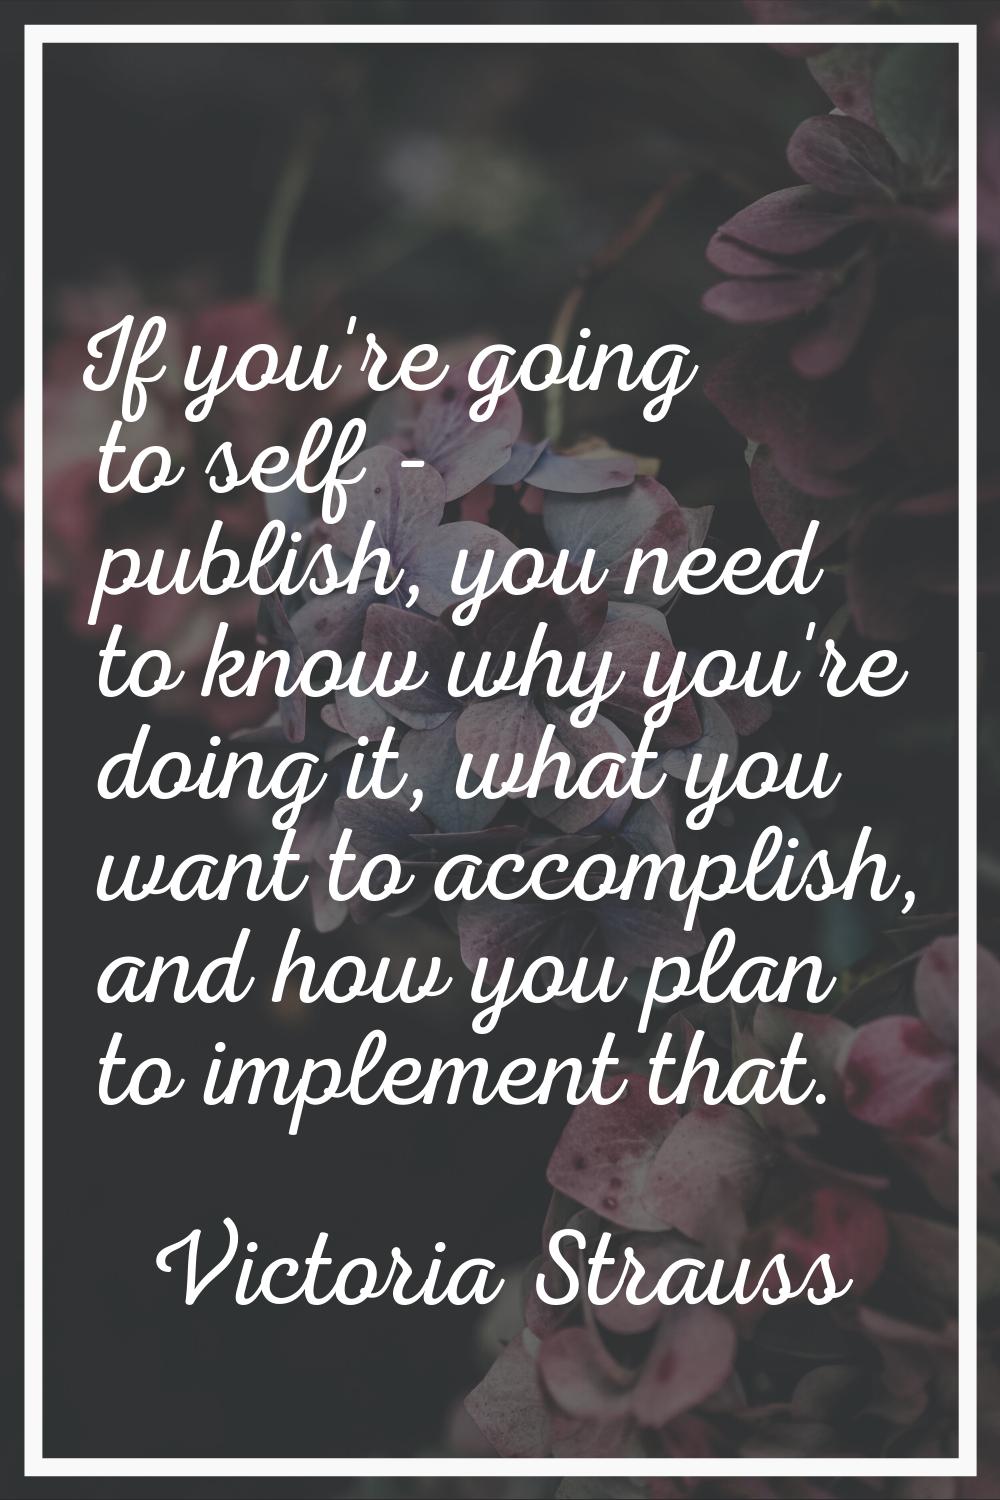 If you're going to self - publish, you need to know why you're doing it, what you want to accomplis